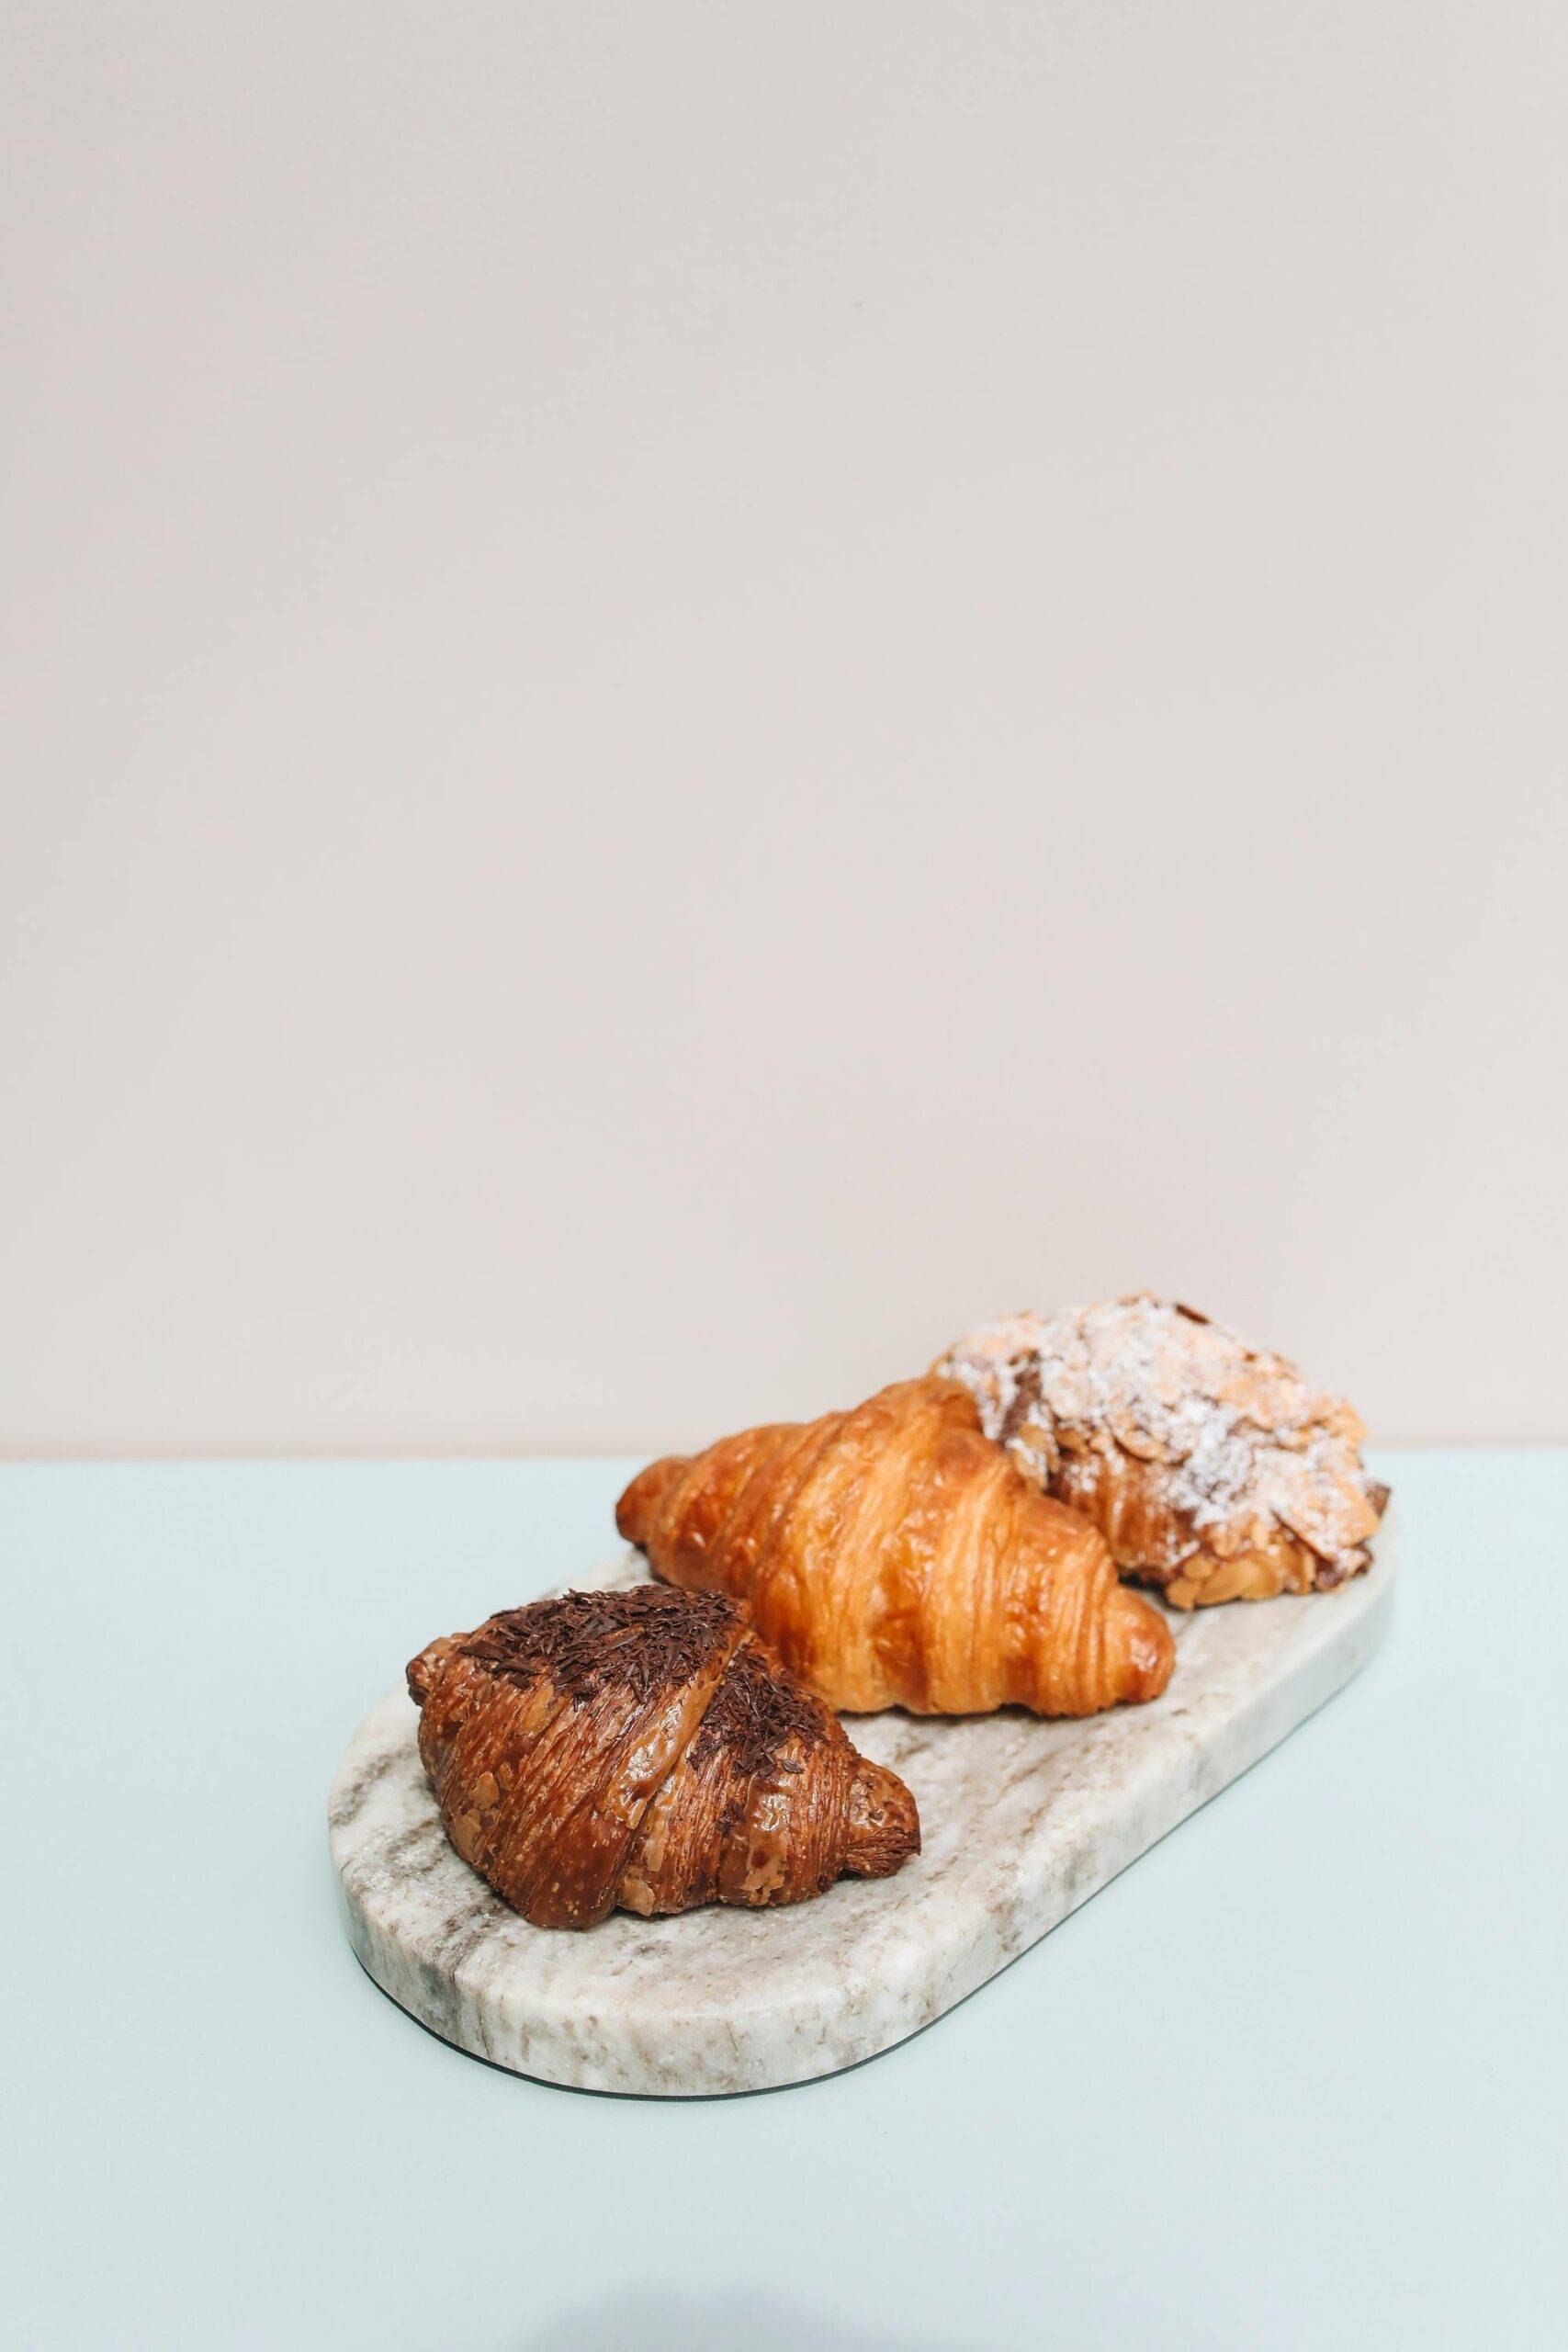 Popular French Baking Techniques For Croissants